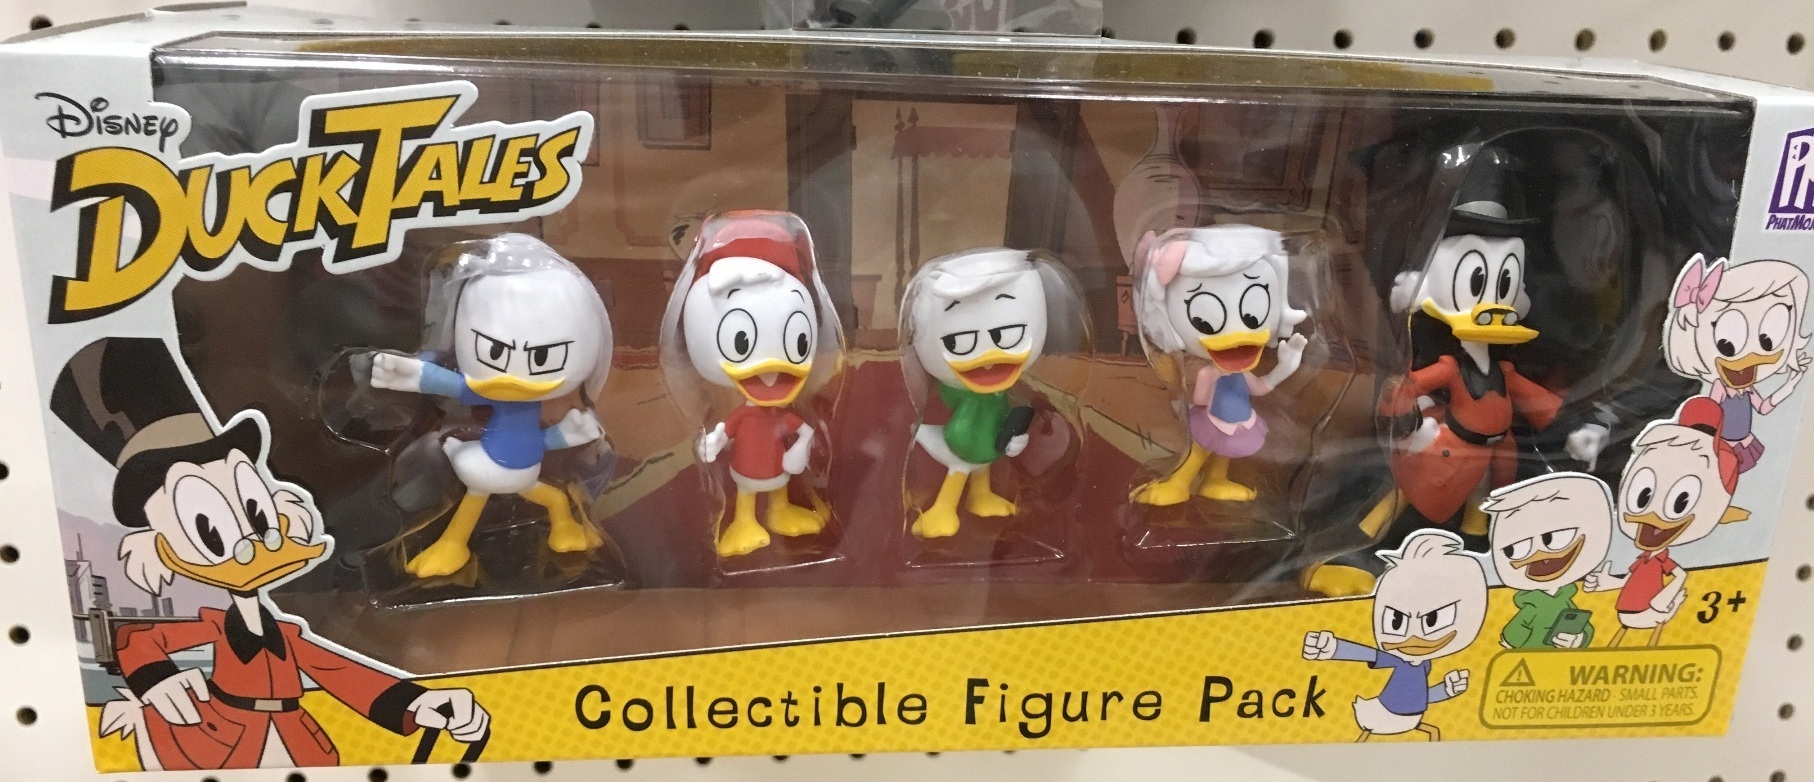 Ducktales Collectible Figure Pack